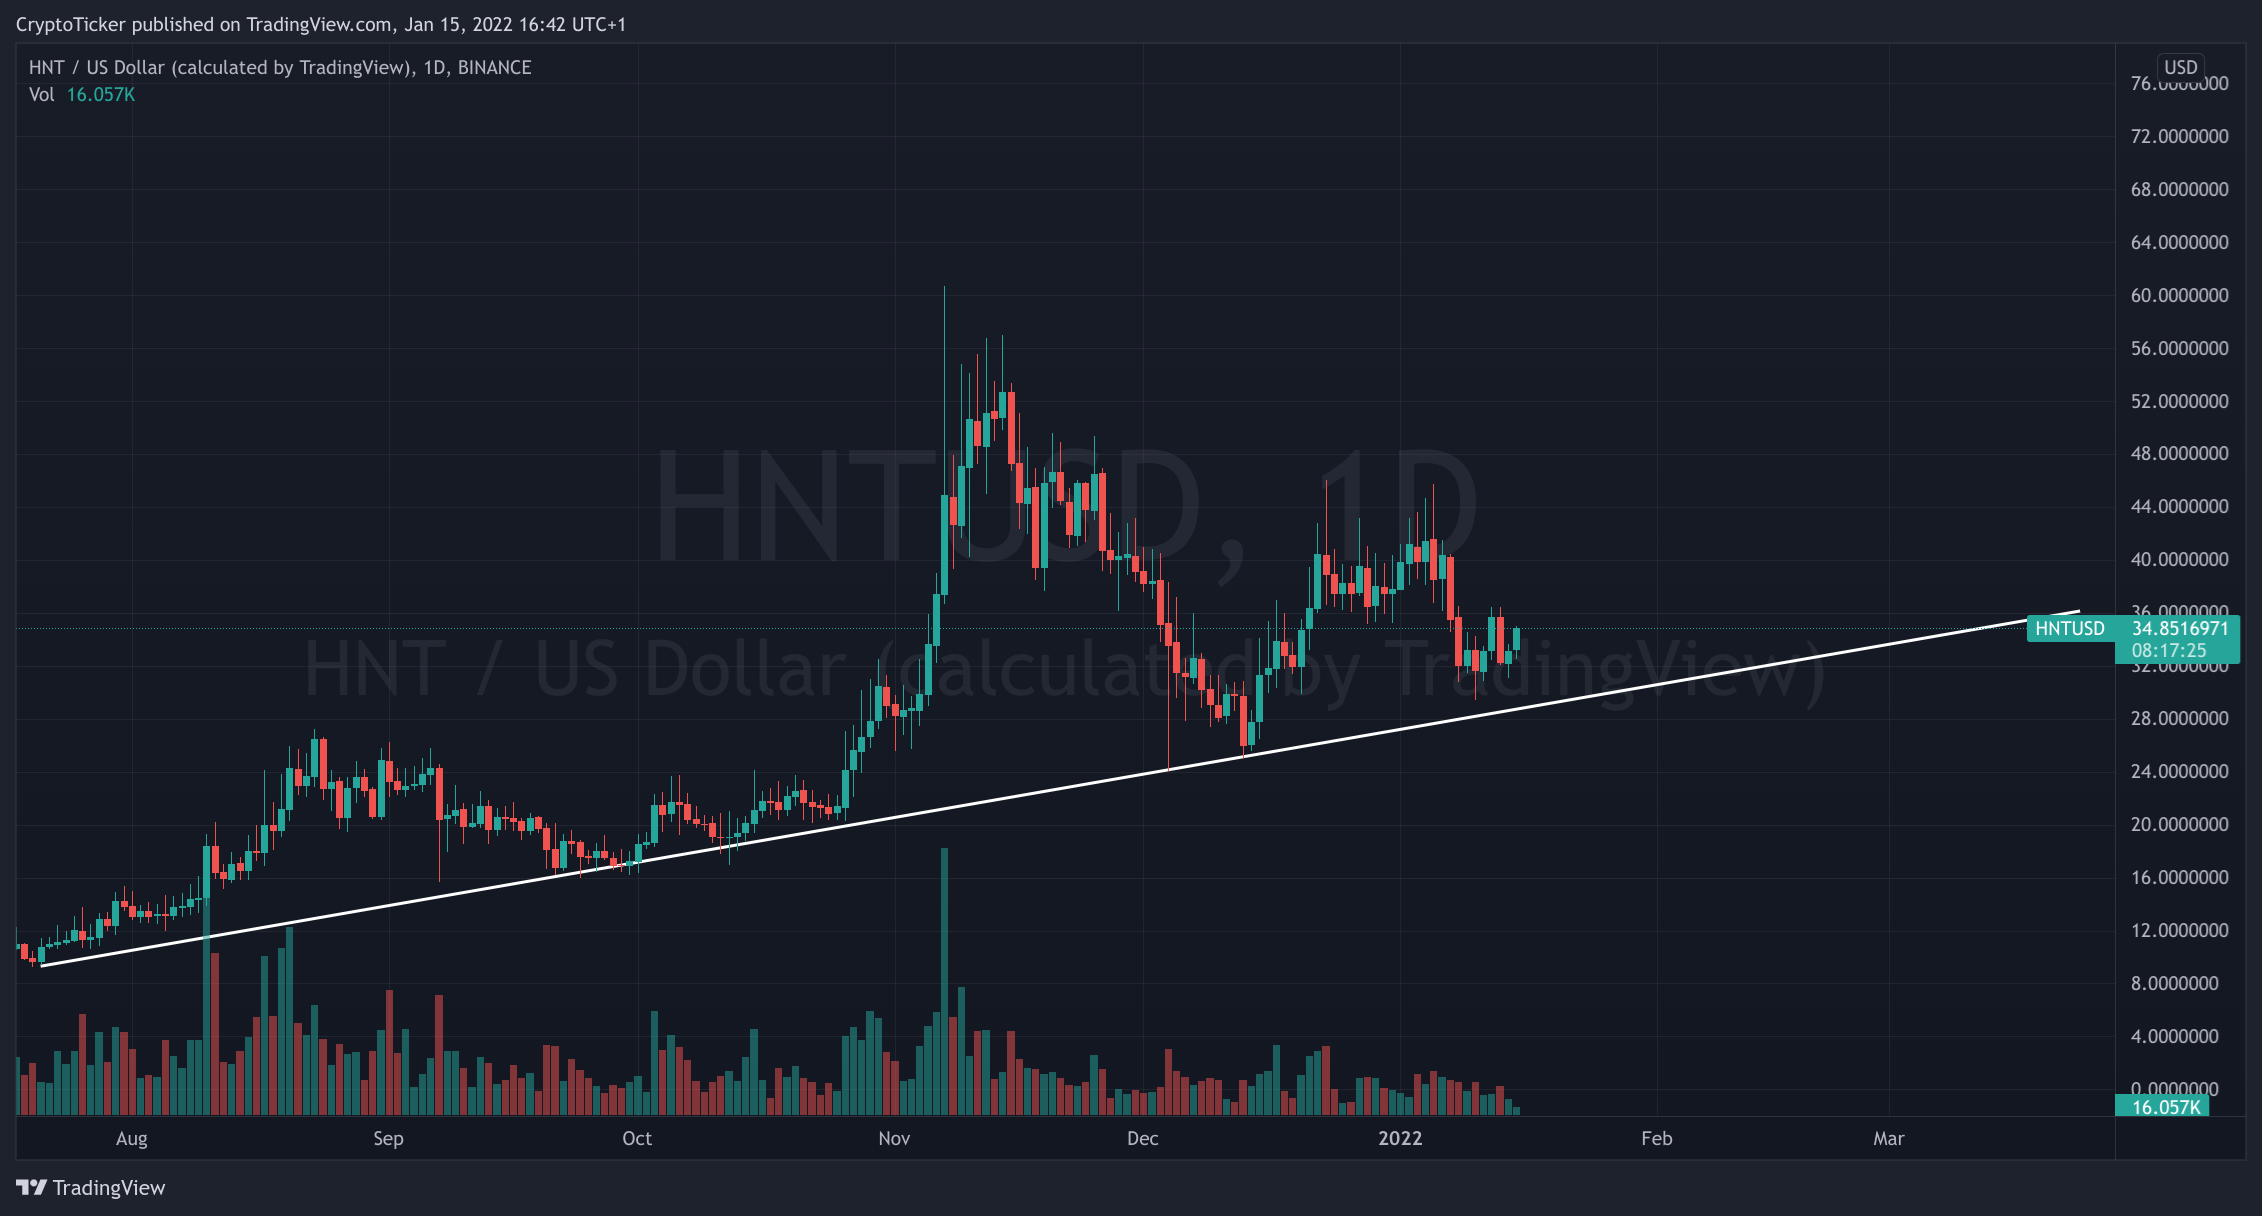 Web3 Tokens - HNT/USD 1-day chart showing Helium's uptrend